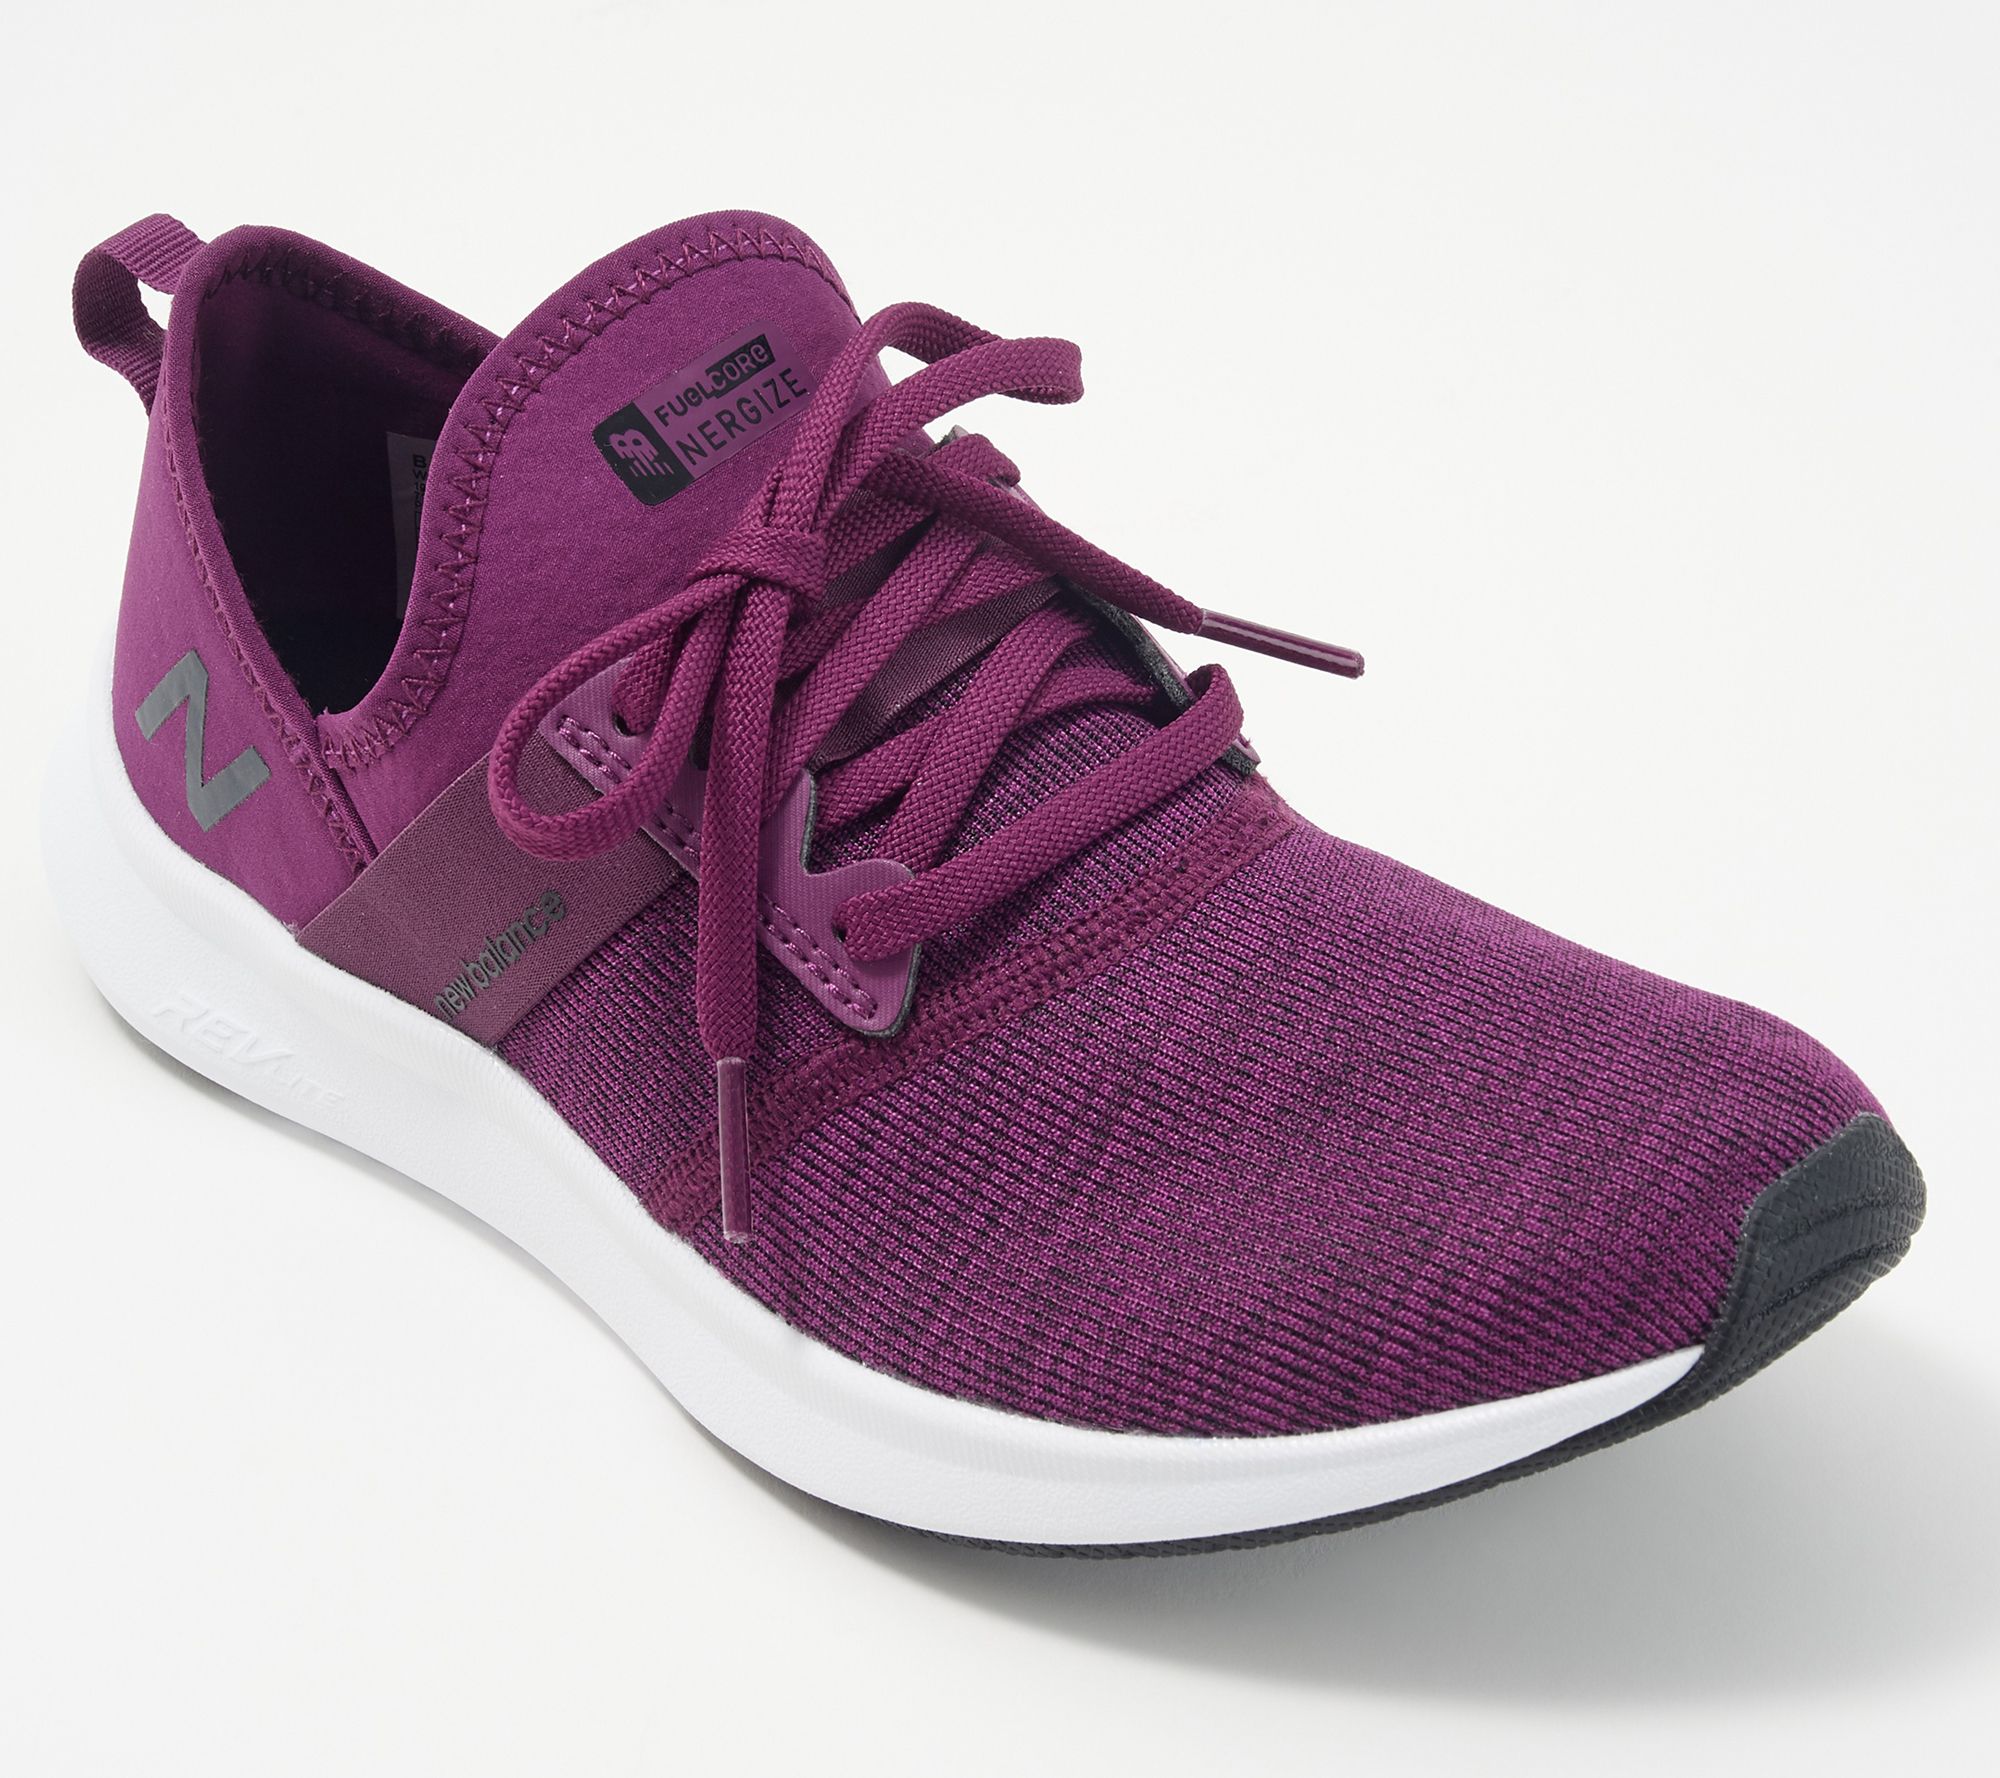 New Balance Lace-Up Sneakers - Nergize v2 - QVC.com